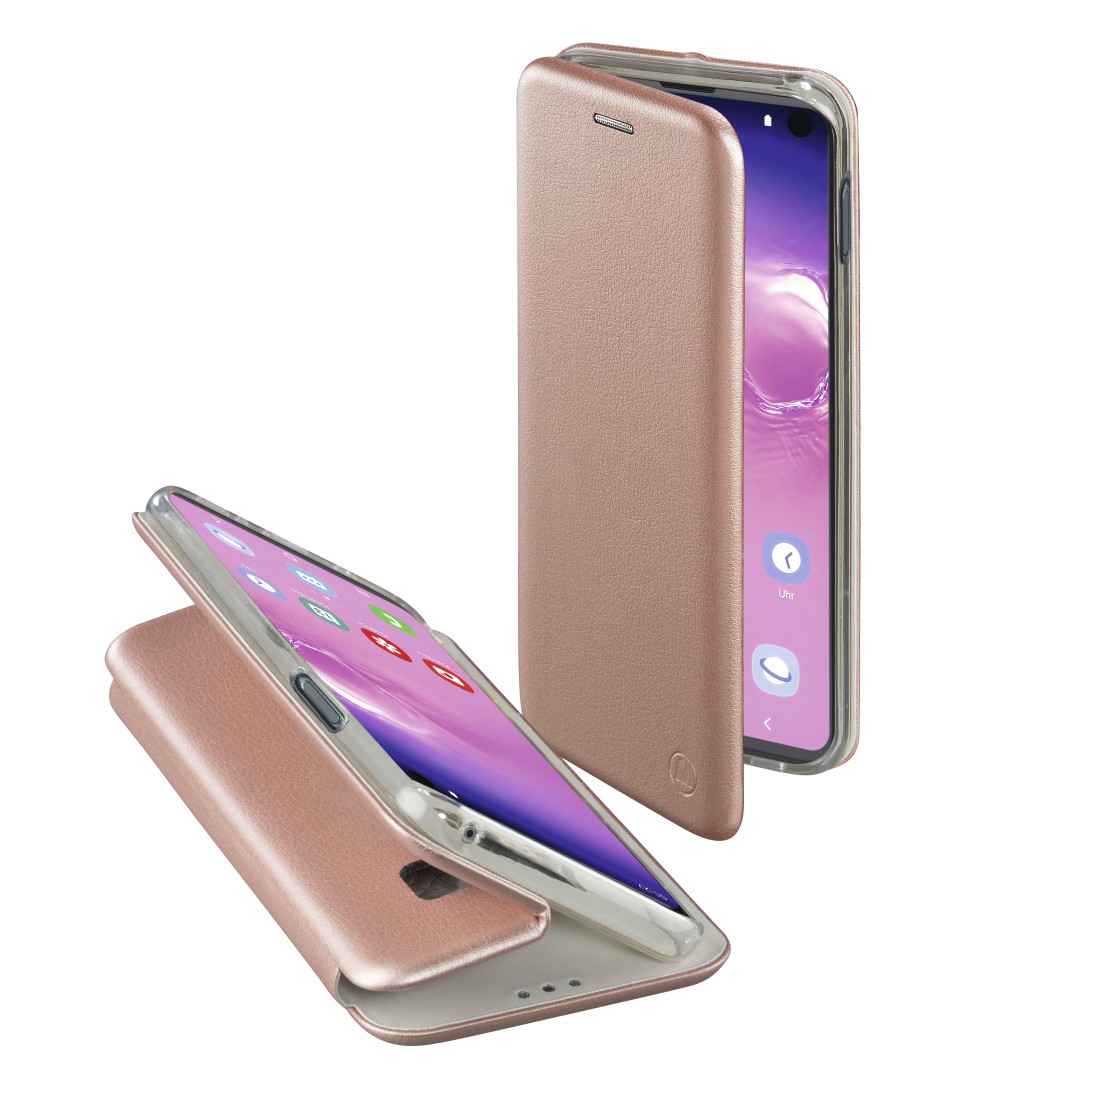 00185940 Hama "Curve" Booklet for Samsung Galaxy S10, rose gold